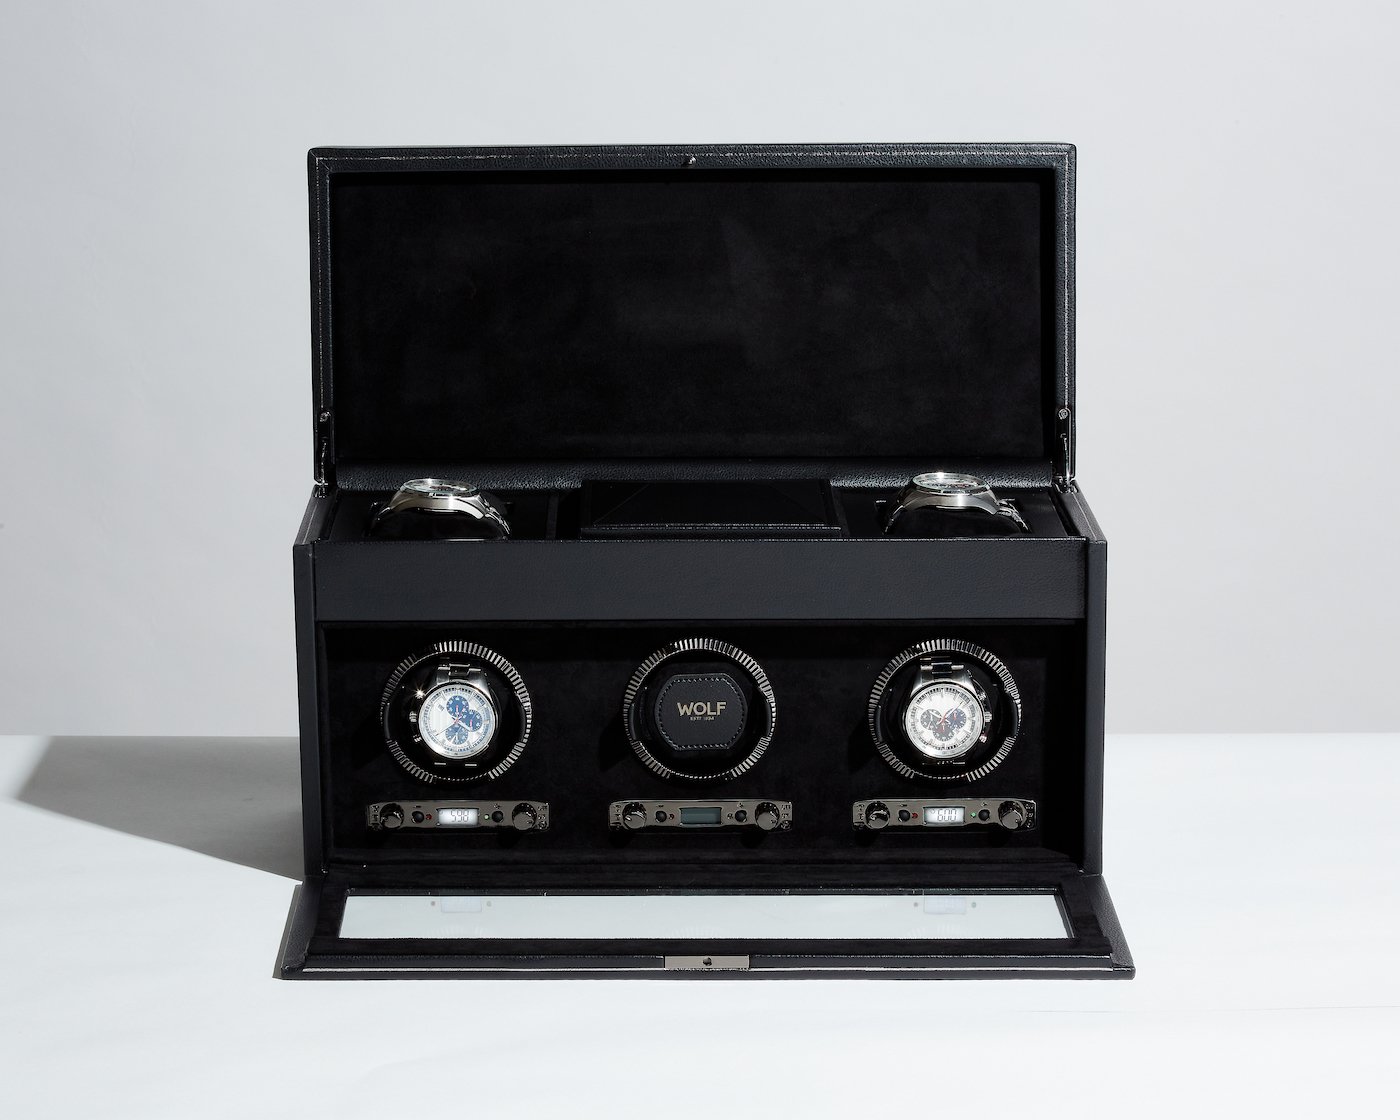 You don't need a watch winder, you need a WOLF